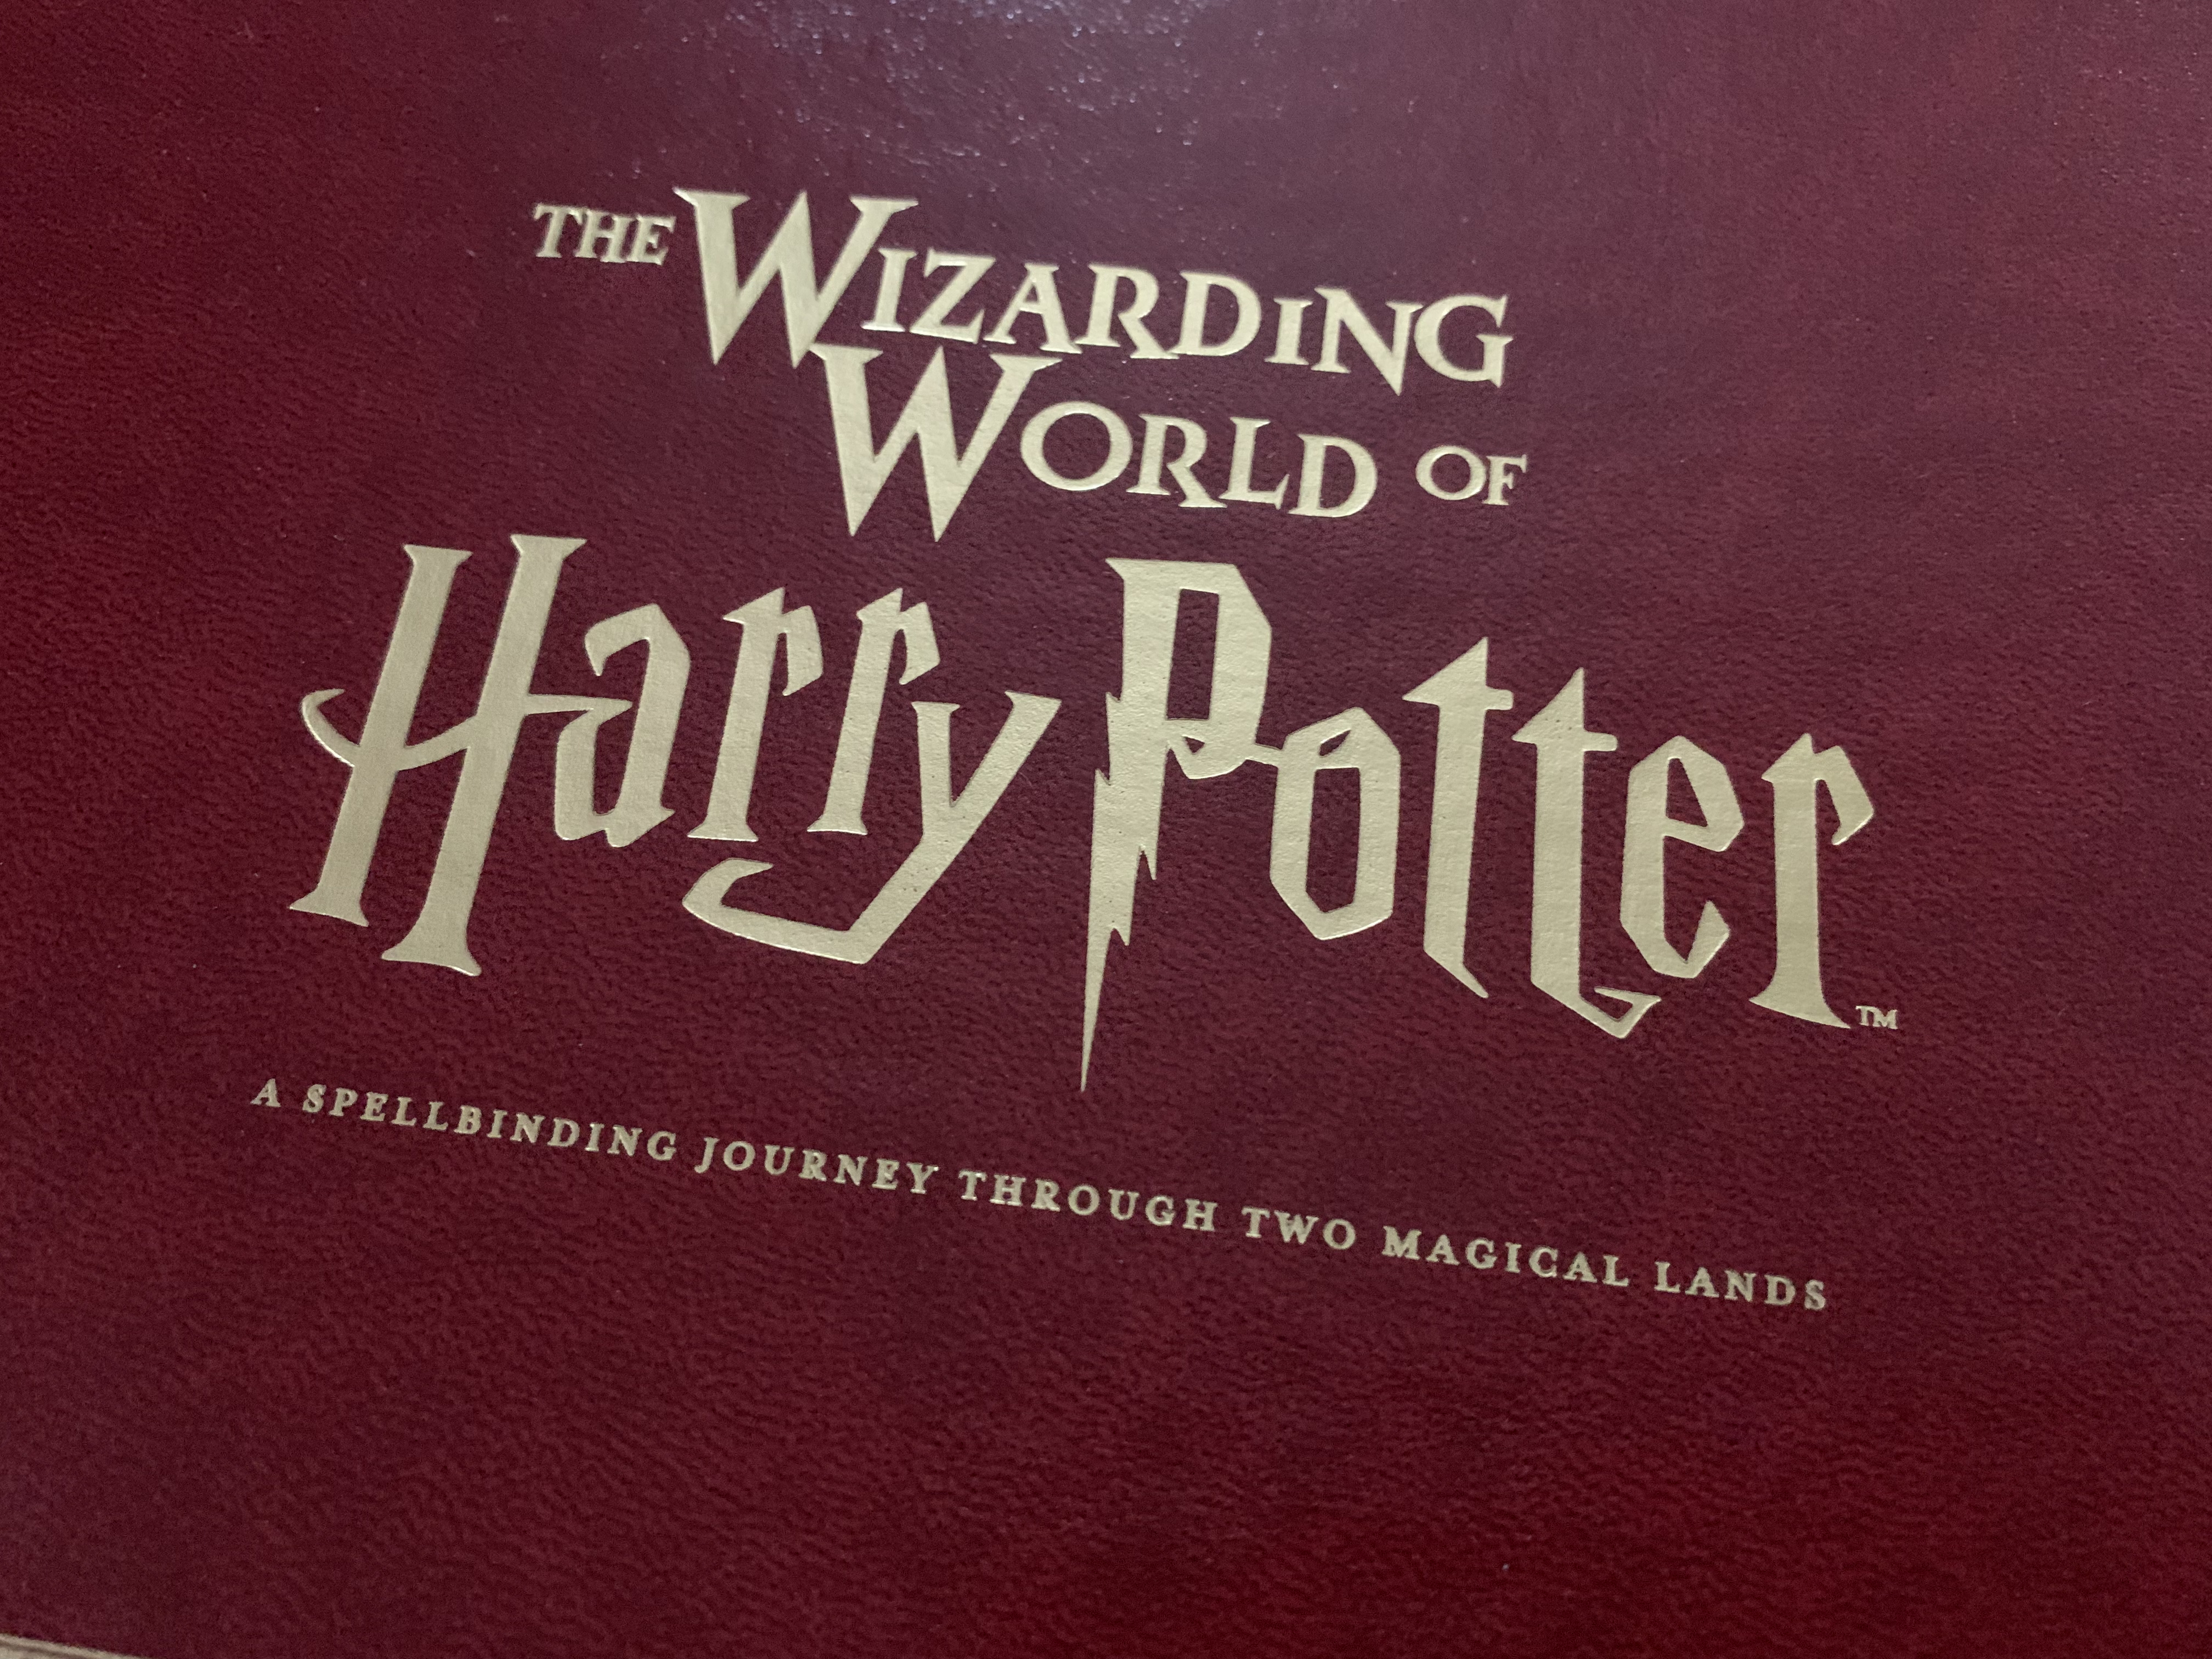 Your “Wizarding World of Harry Potter Exclusive Vacation Package” will feature a keepsake box of special items that will arrive prior to your trip.